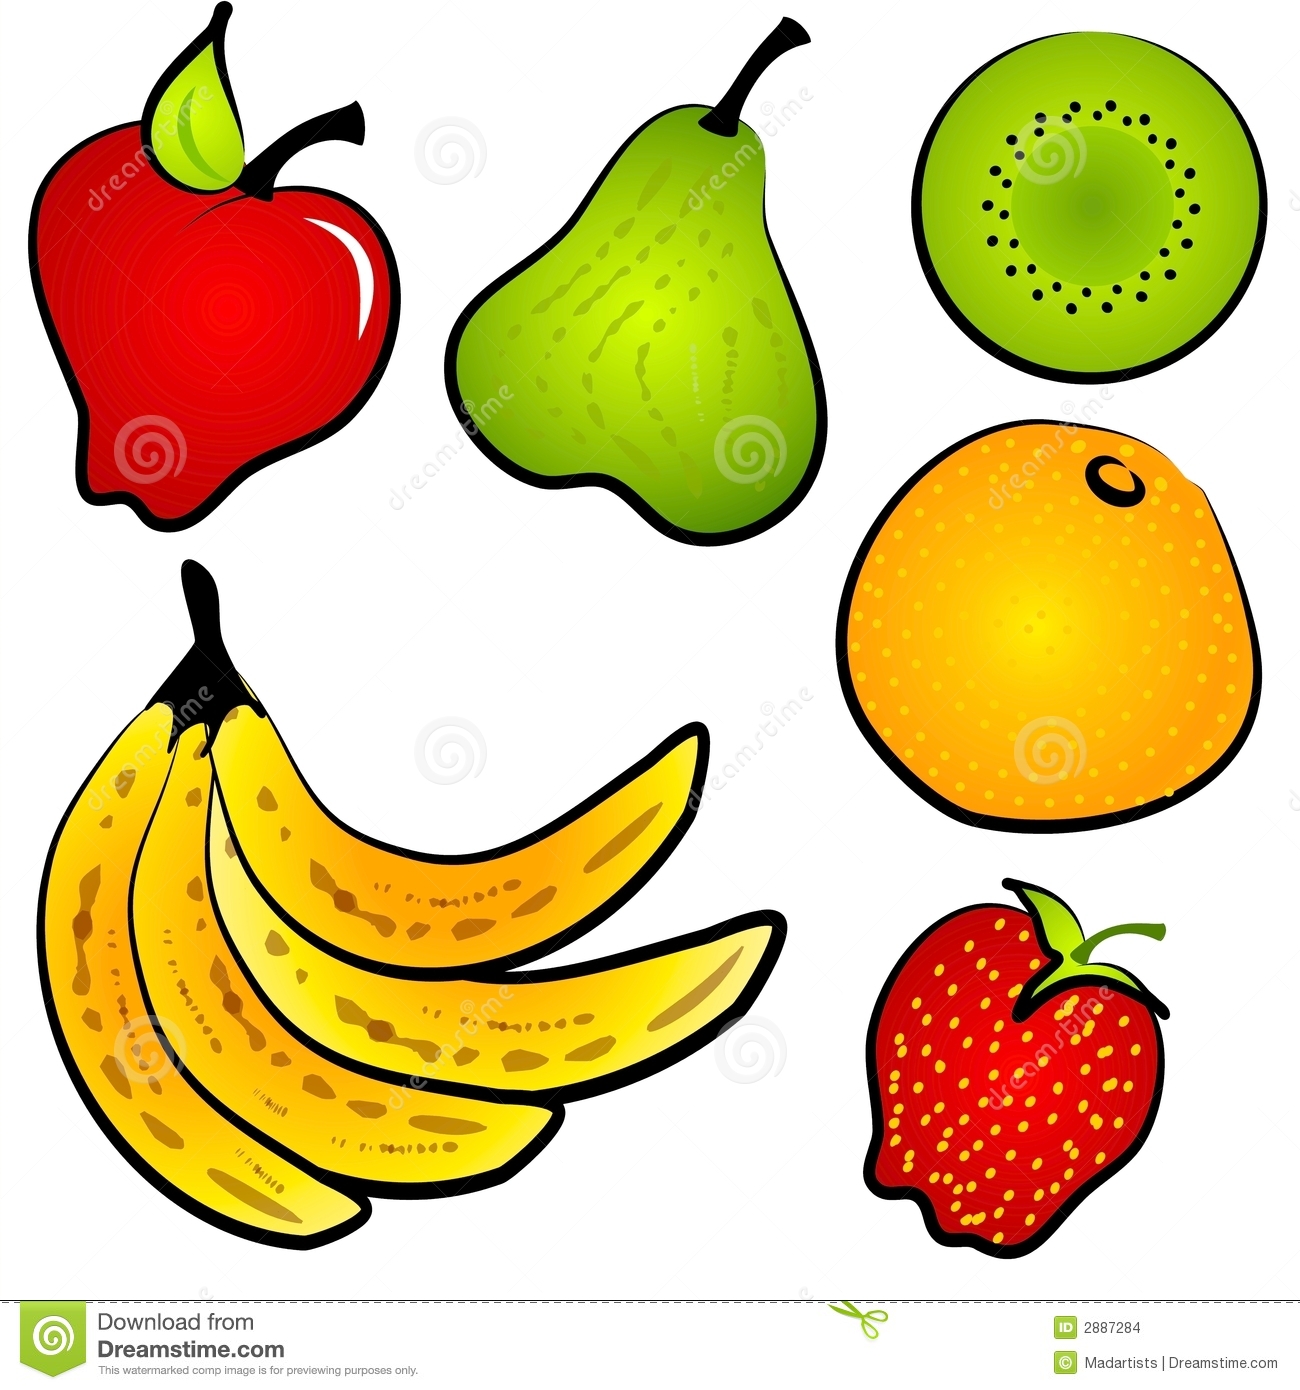 Clip Art Collection Of Healthy Fruits Including Kiwi Apple